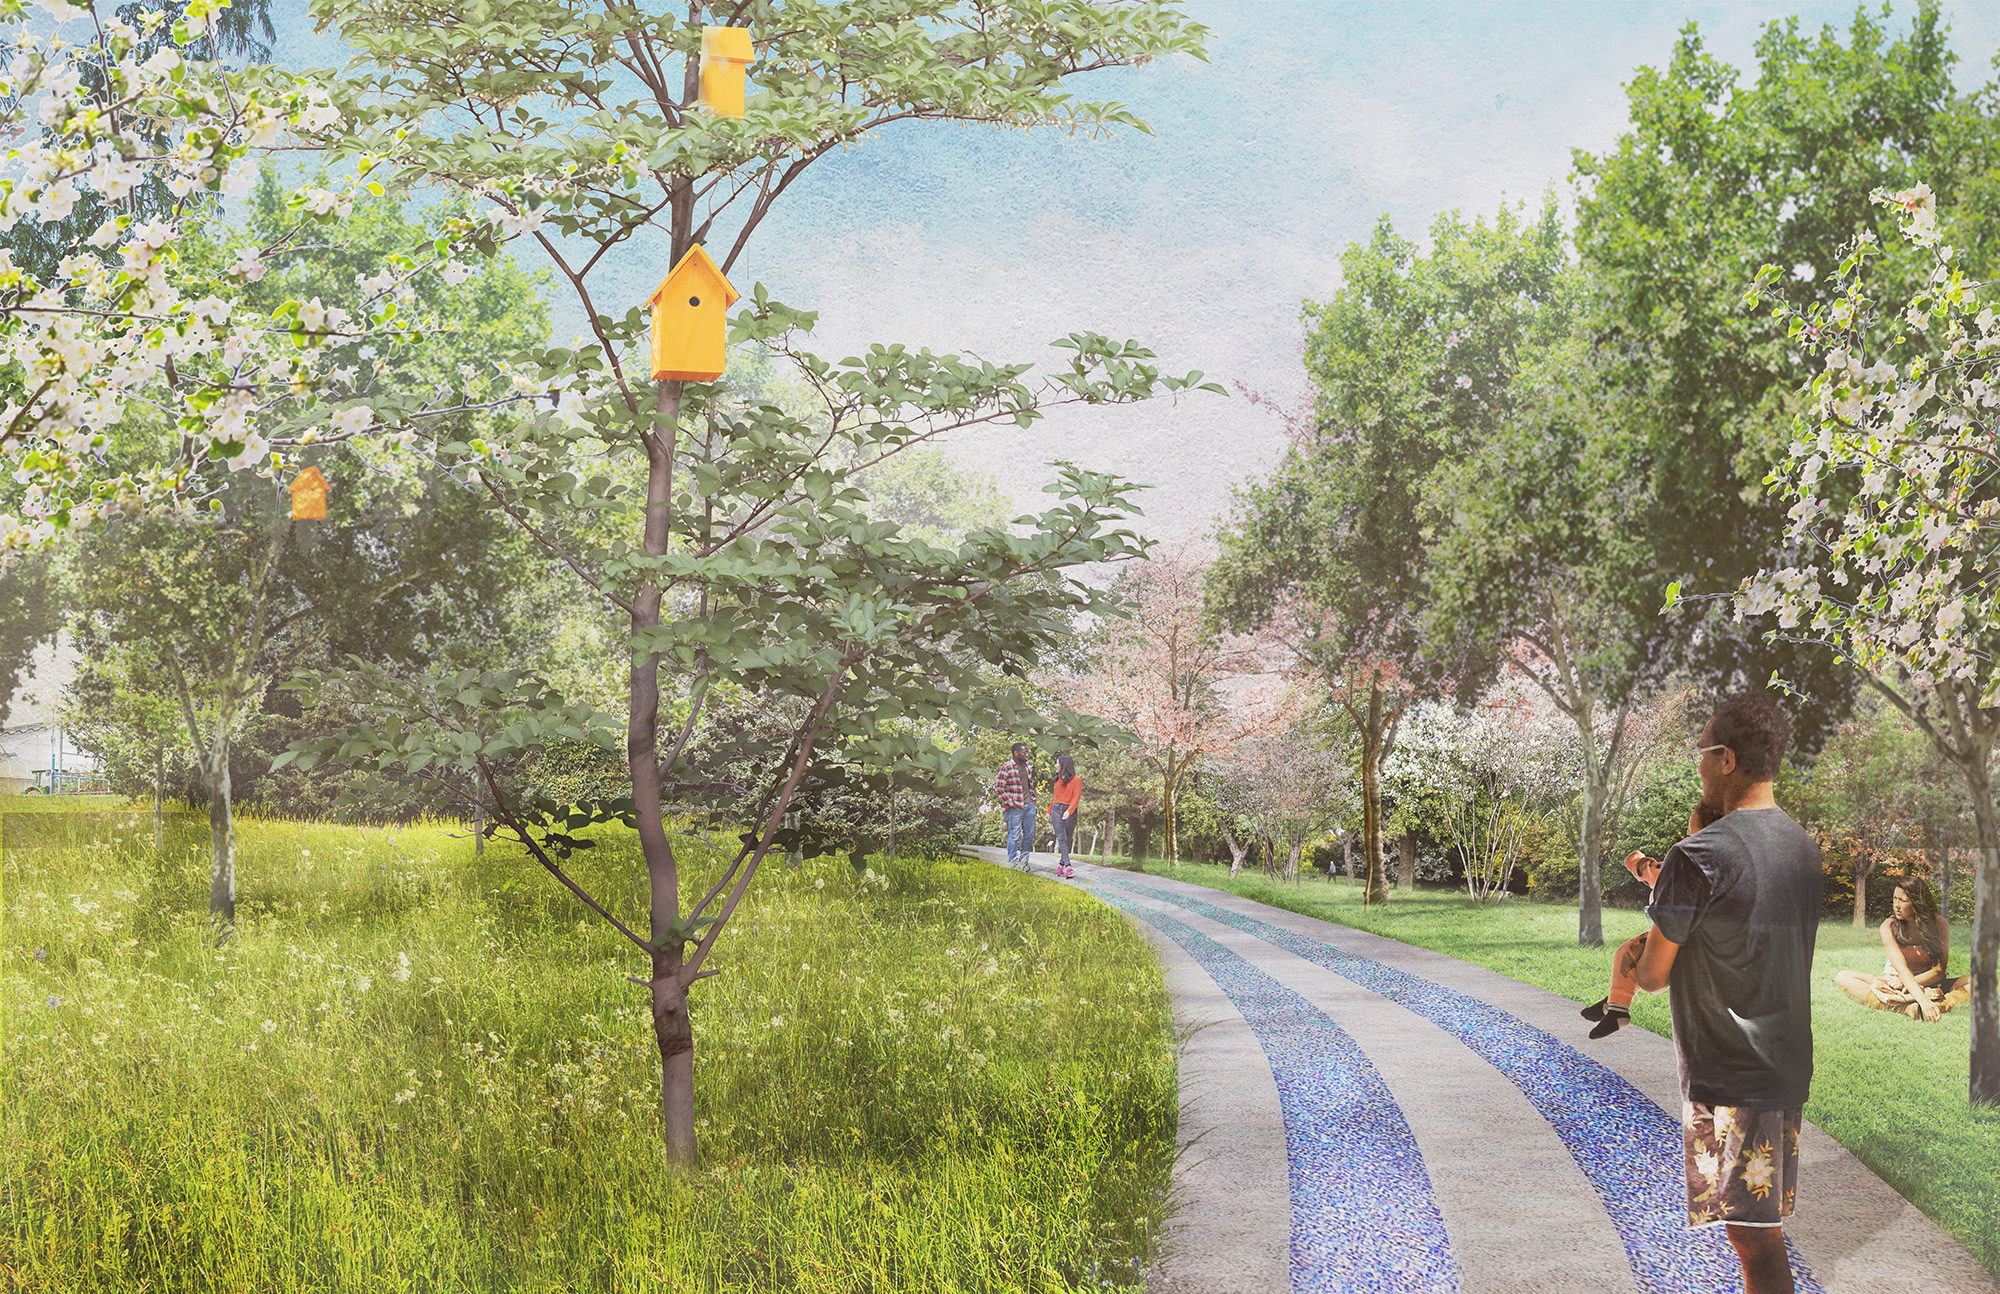 This view demonstrates what the Two-Row Wampum Belt path and orchard could look like. Featured are some ecological art in the form of birdhouses, meadow planting on one side of the path and mown picnic lawn on the other.